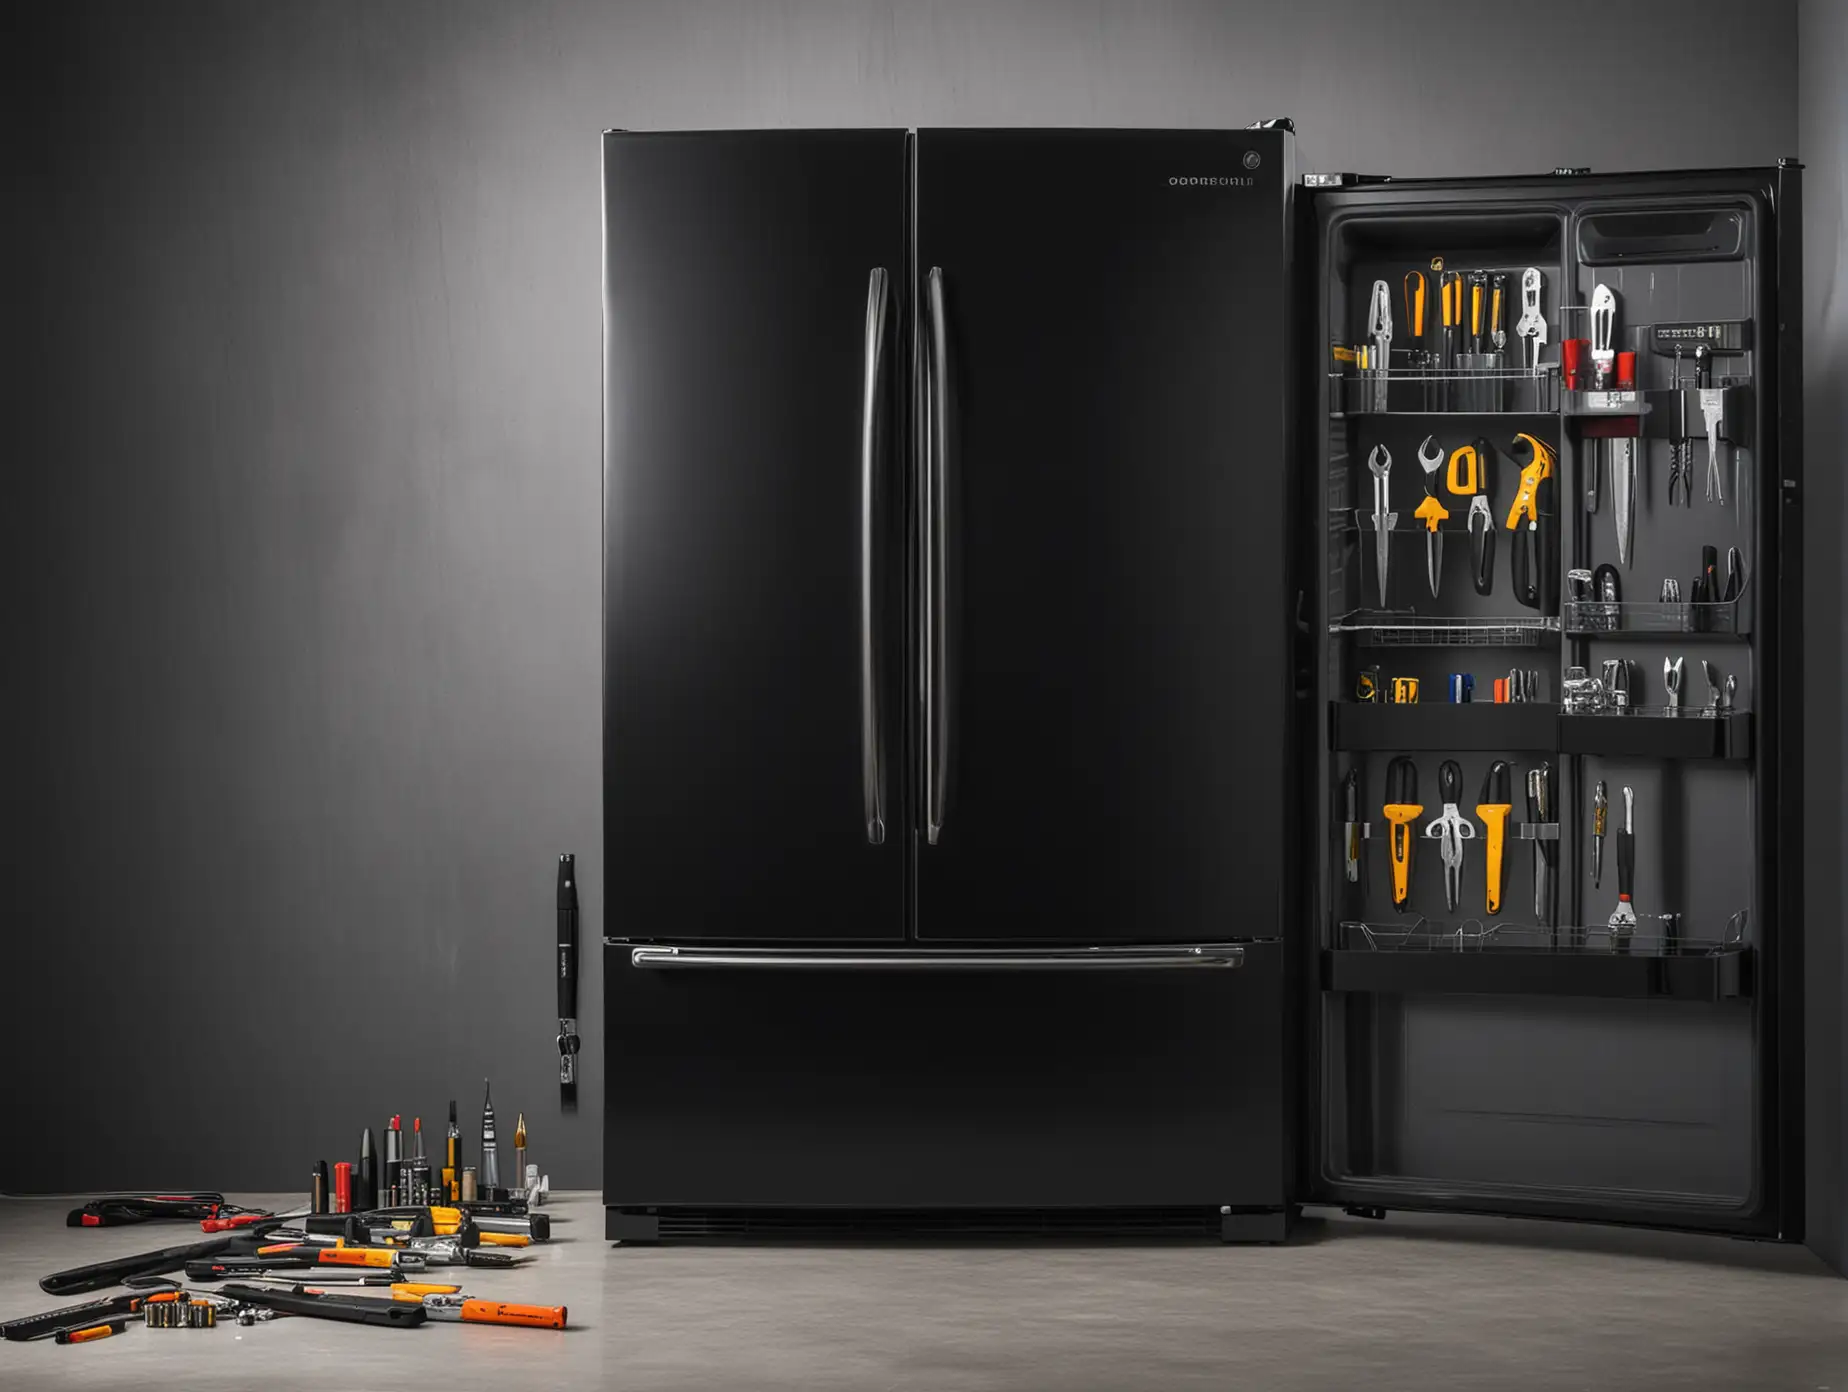 Luxury-Black-Fridge-with-Assorted-Screwdrivers-and-Wrench